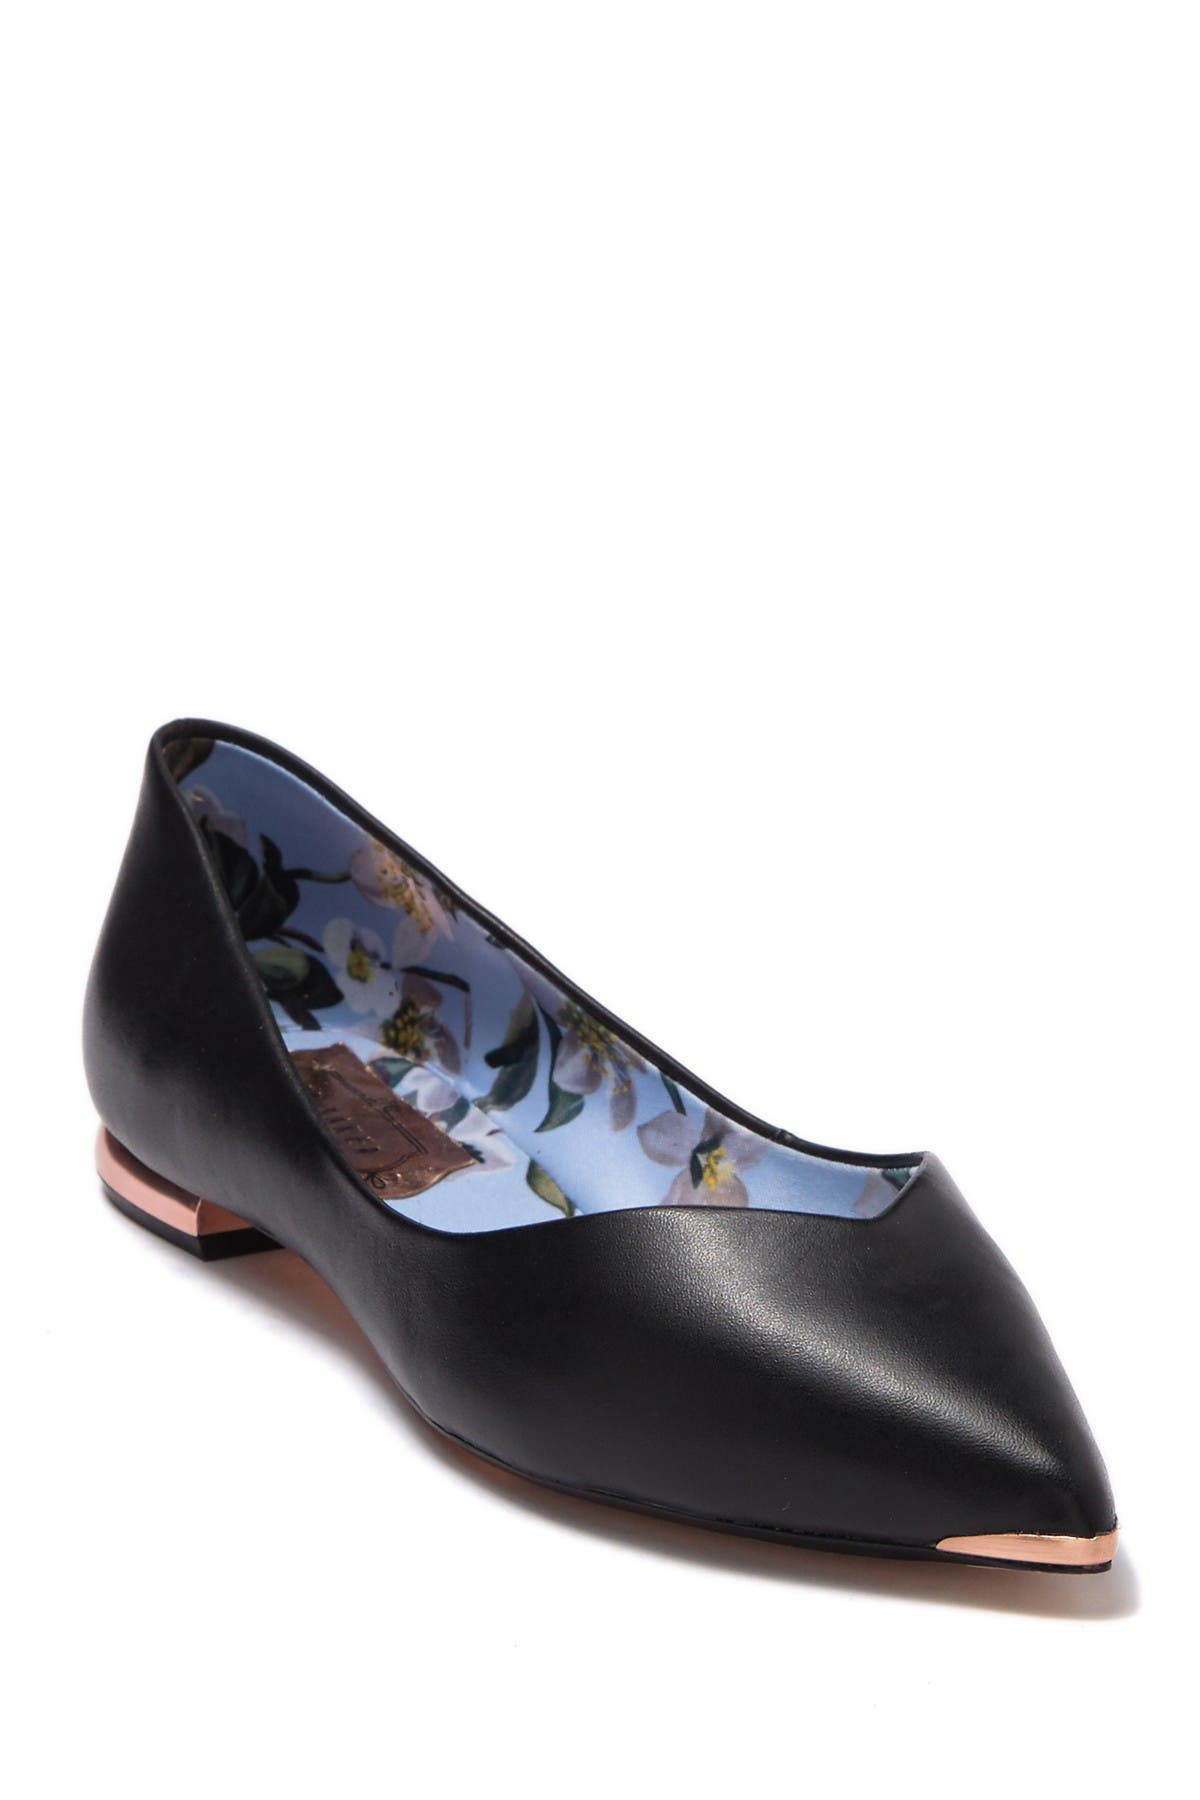 ted baker pointed flats